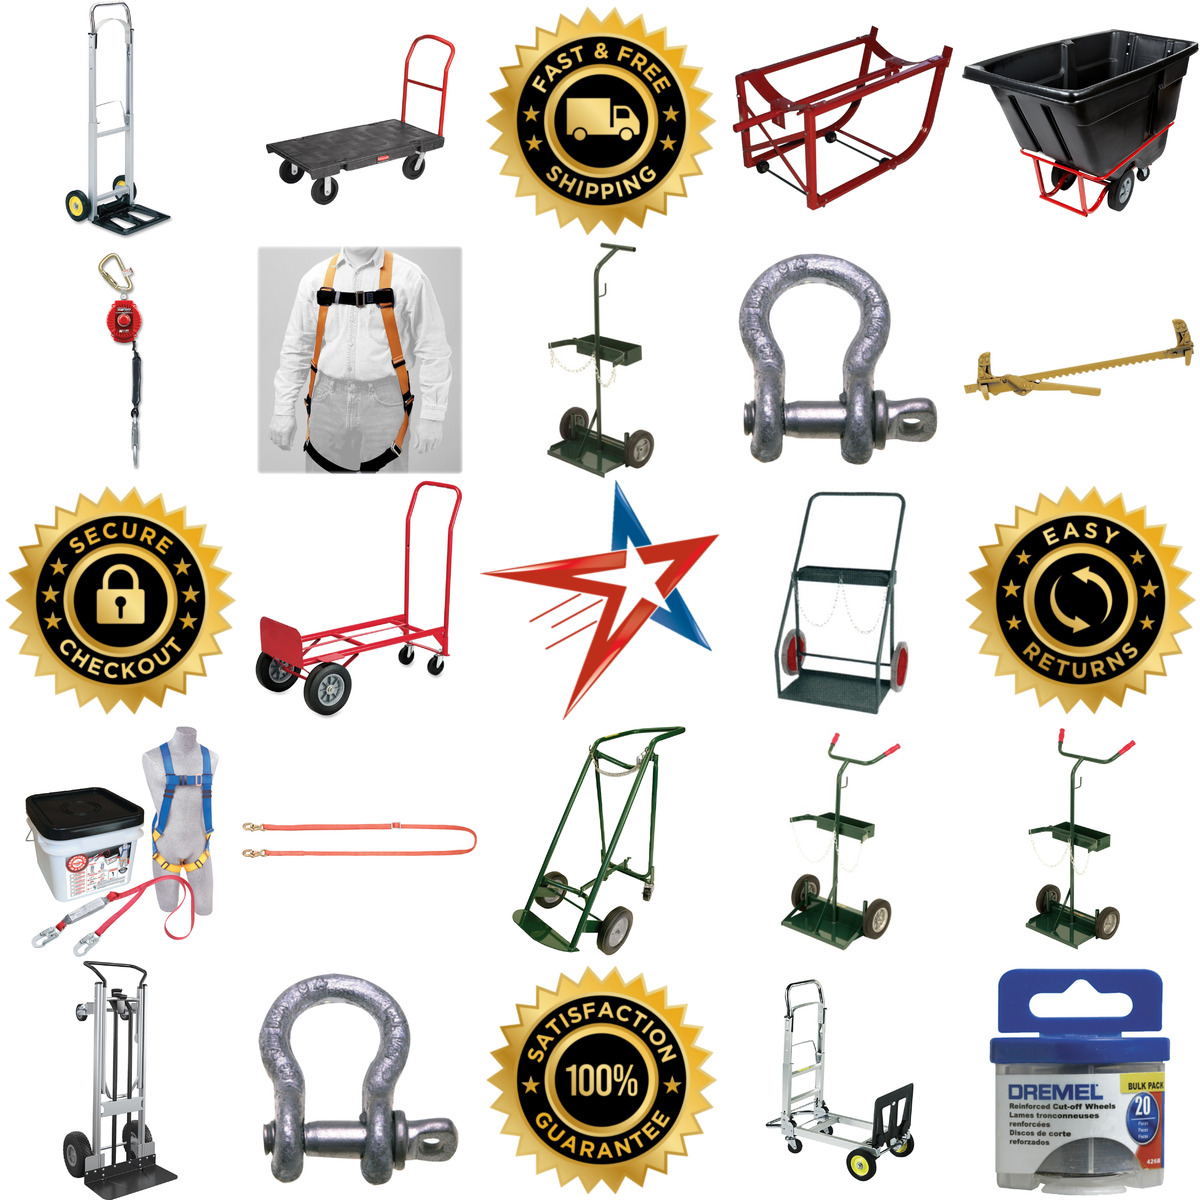 A selection of Material Handling products on GoVets